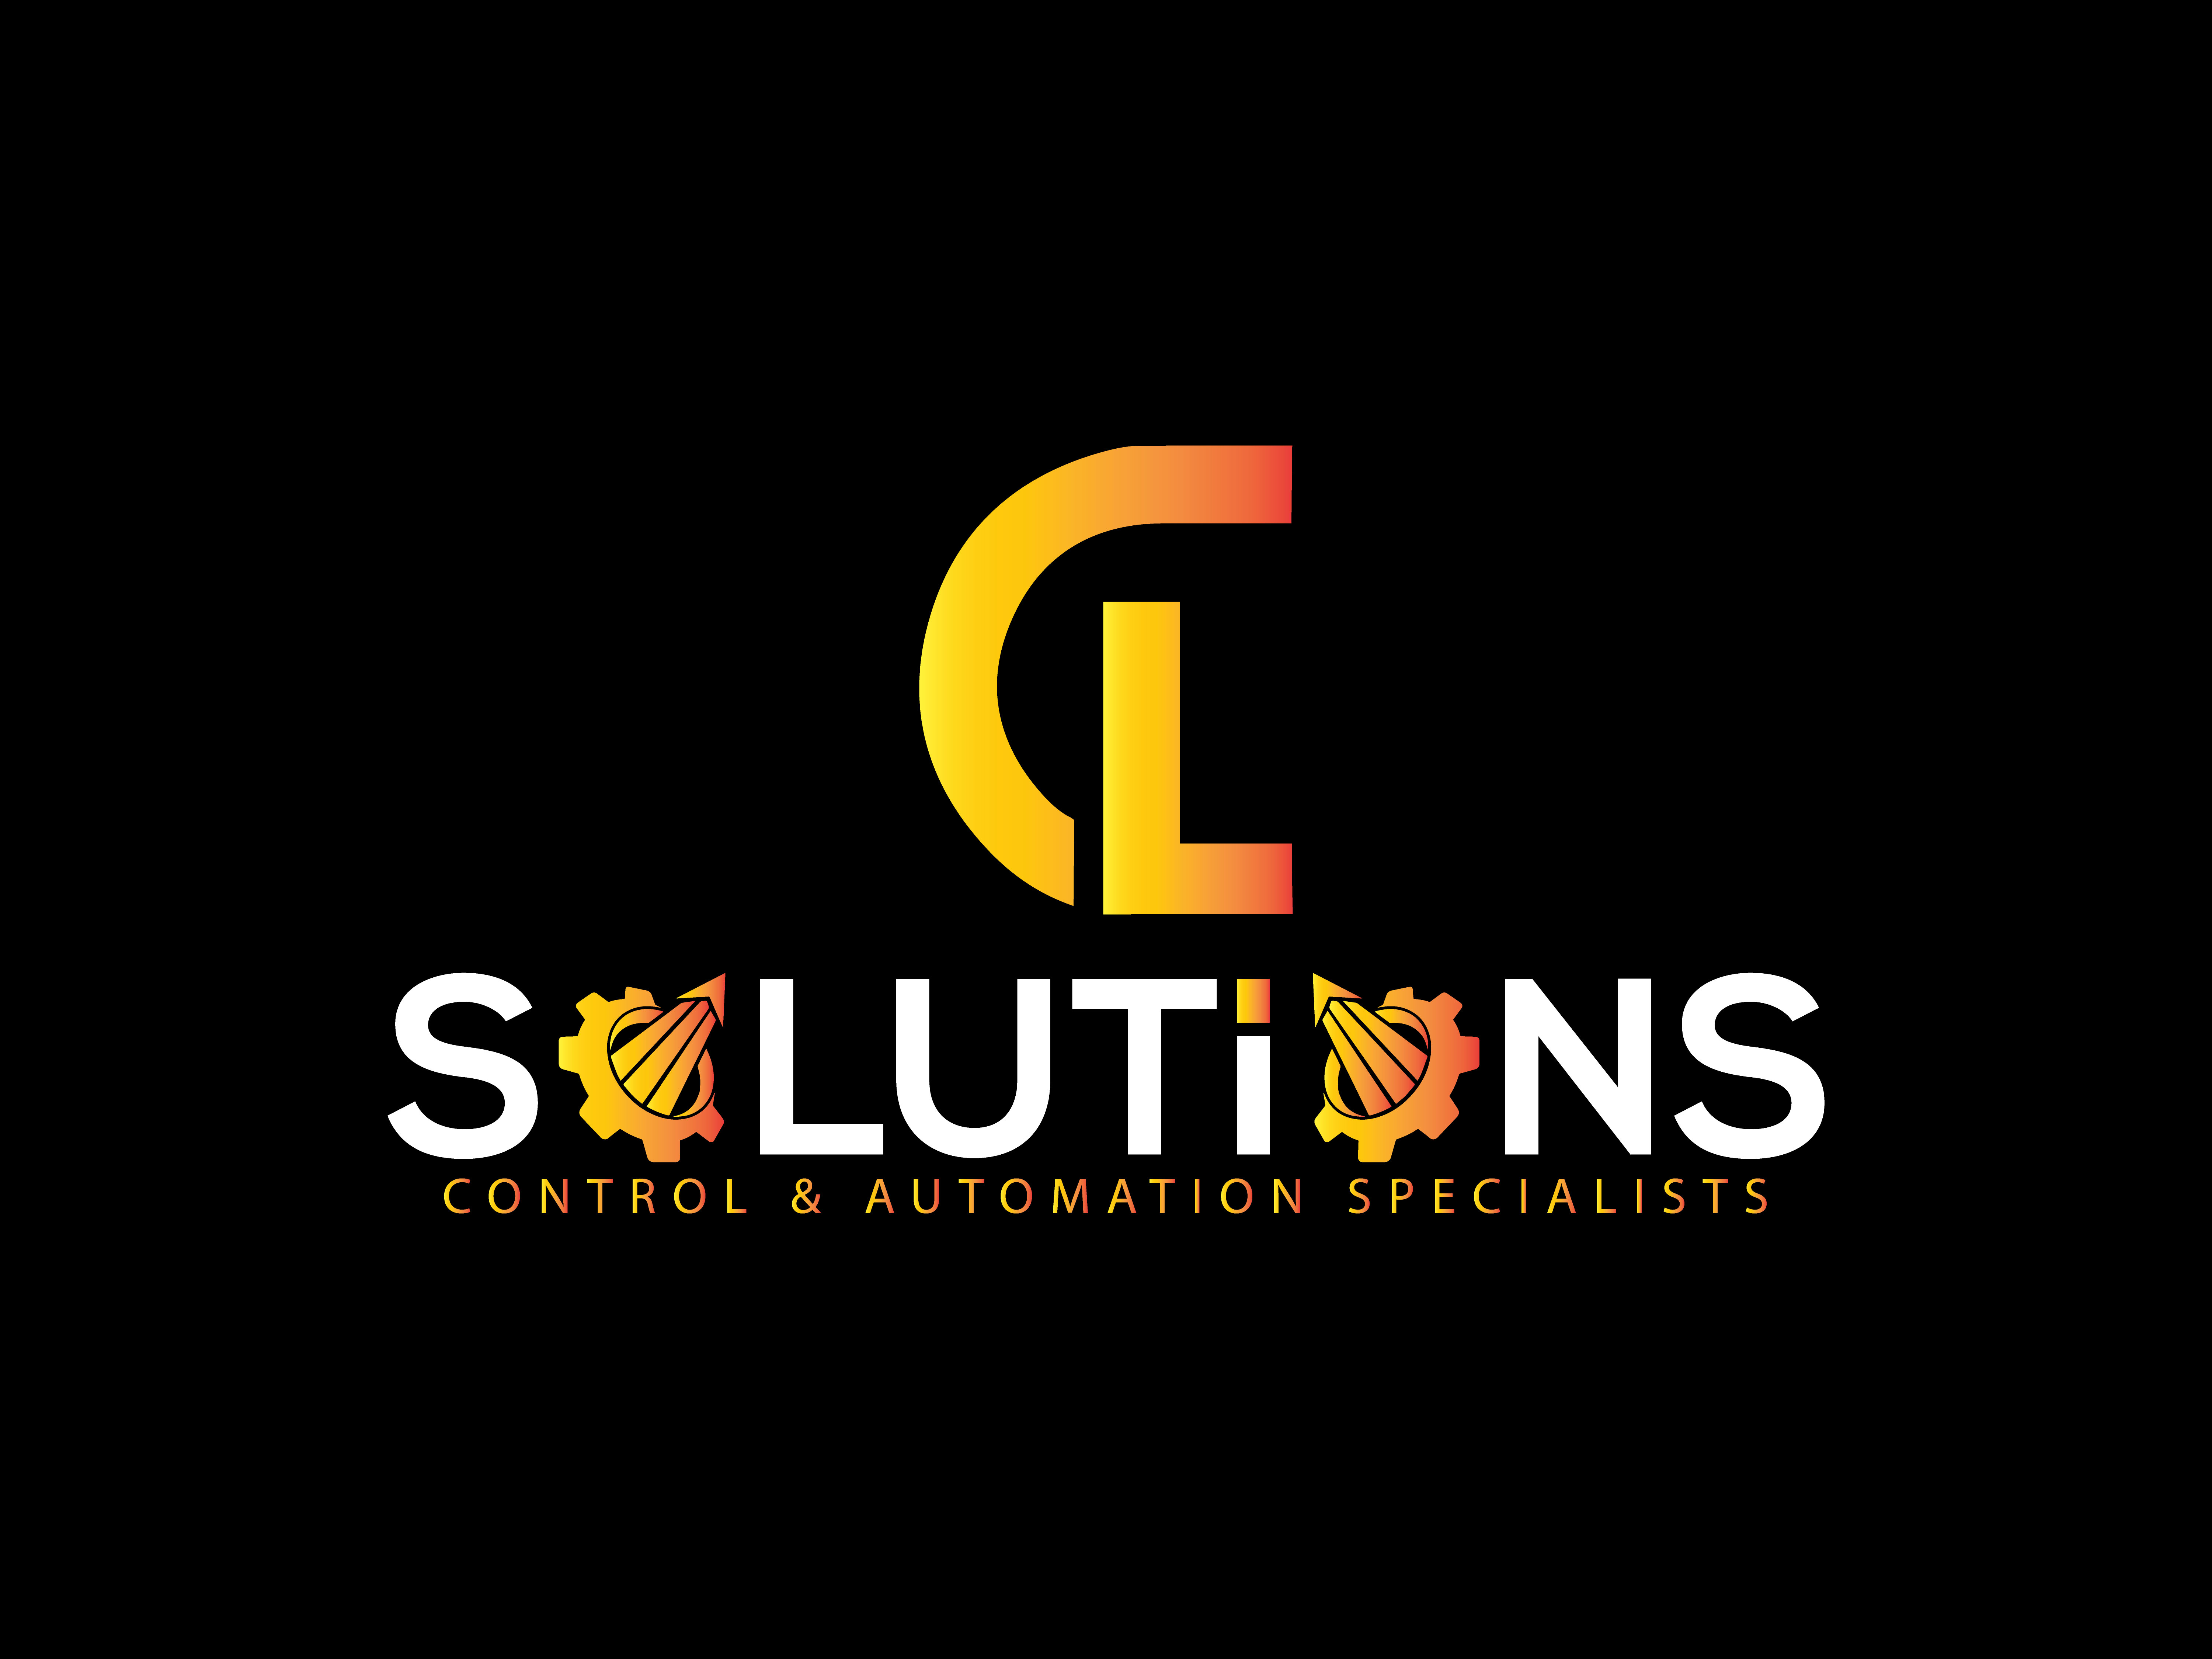 CL Solutions 